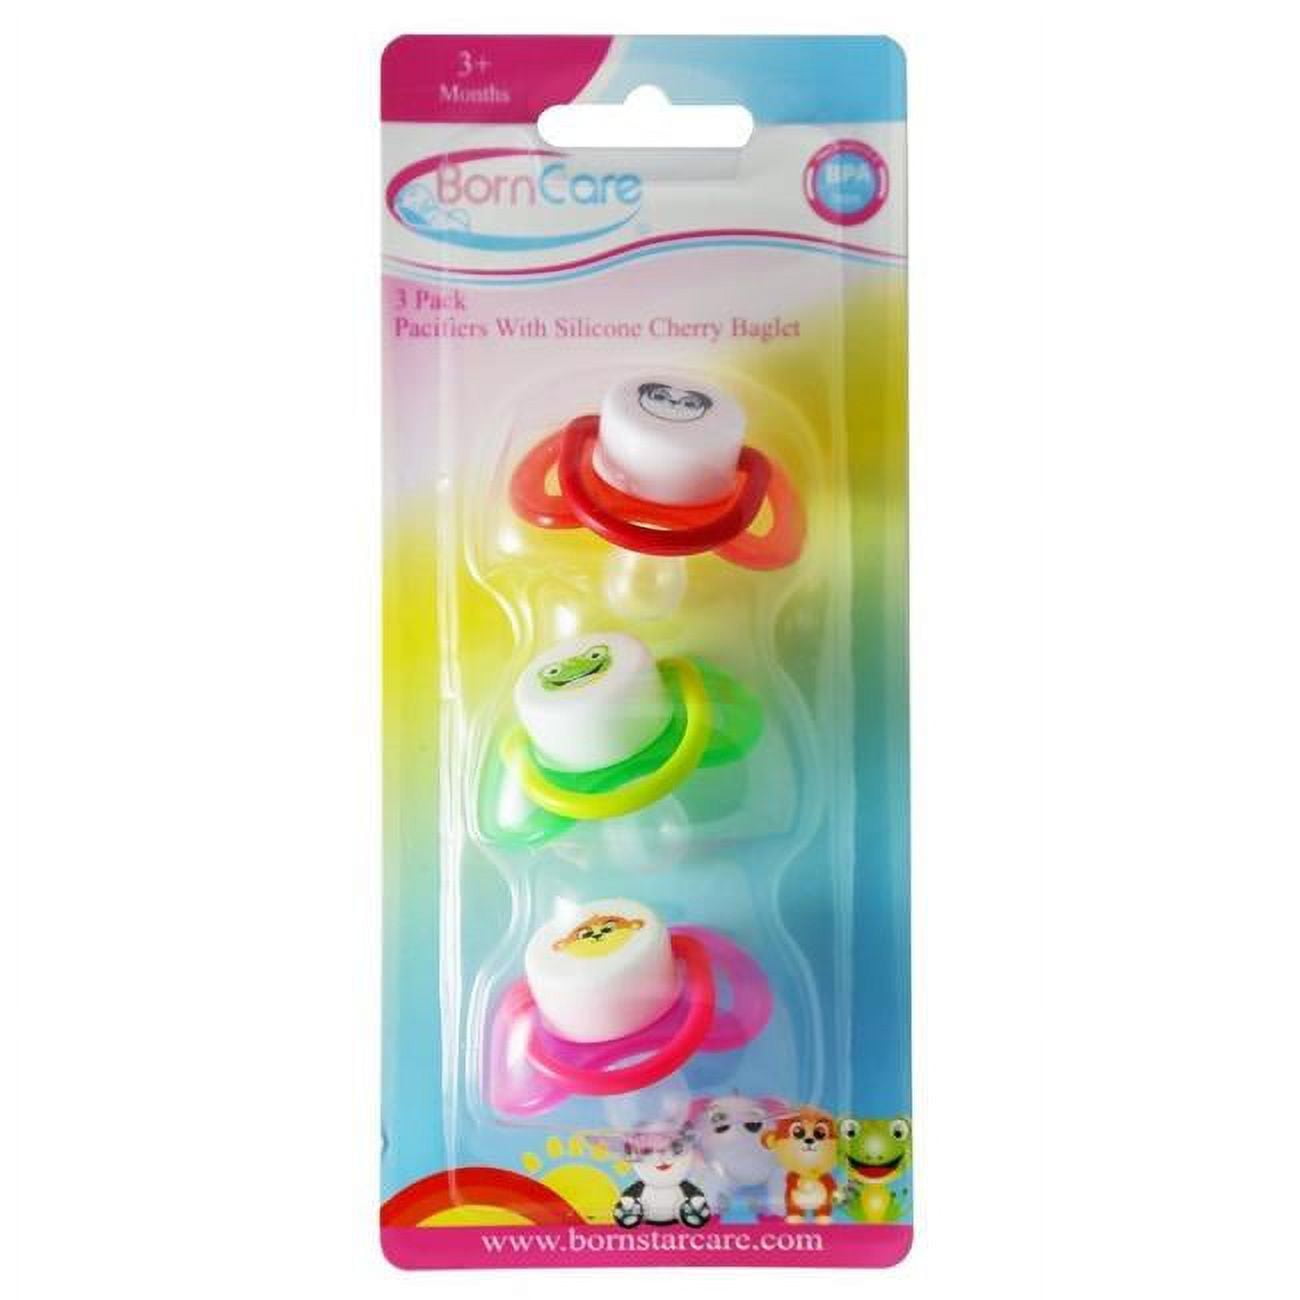 Bcws-120 3 Months Plus, Pacifier Printed With Silicone Cherry Baglet - 3 Pack